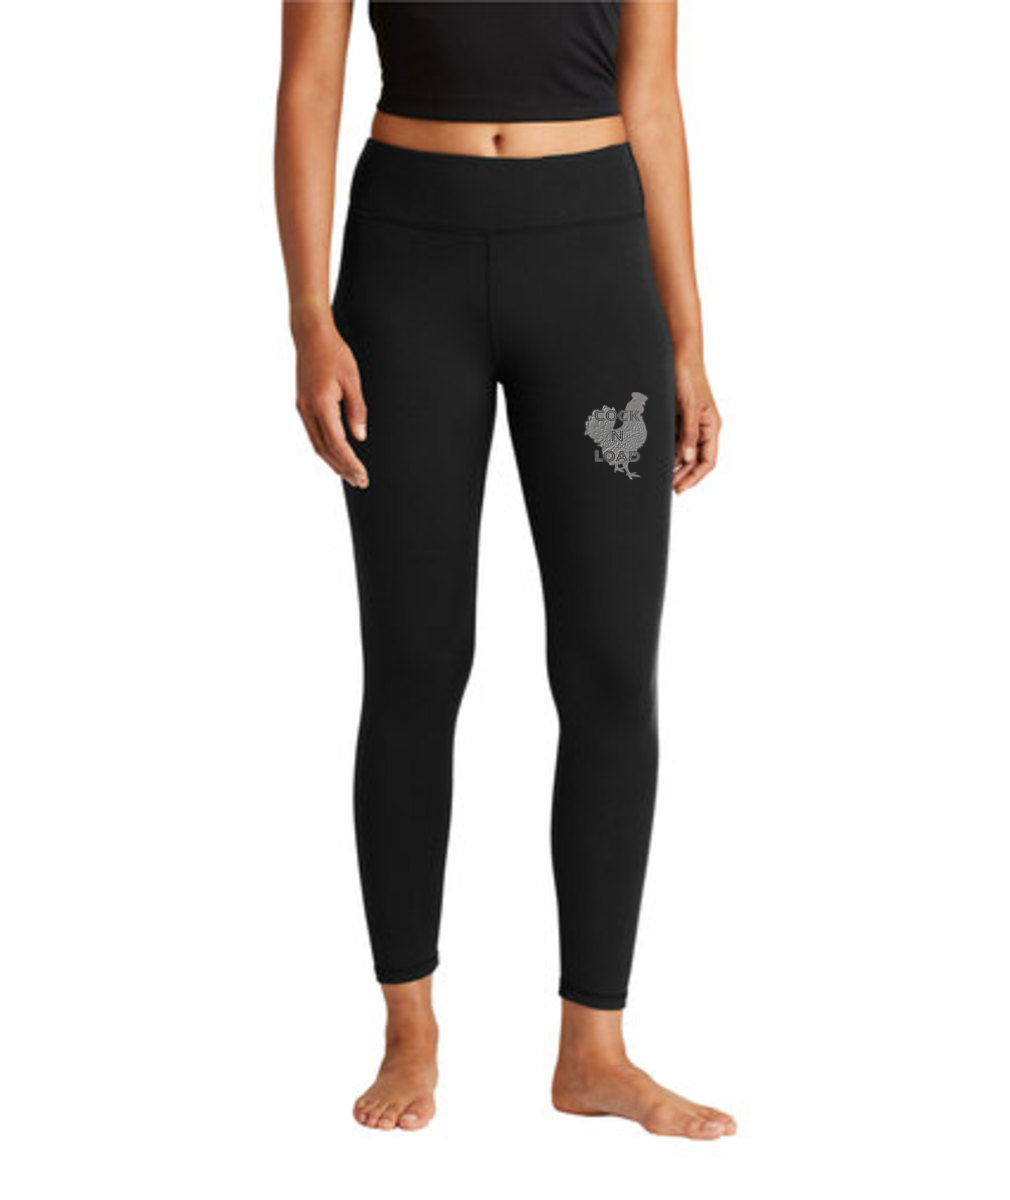 Cock n load Embroidered Women's 7/8 Legging or Similar